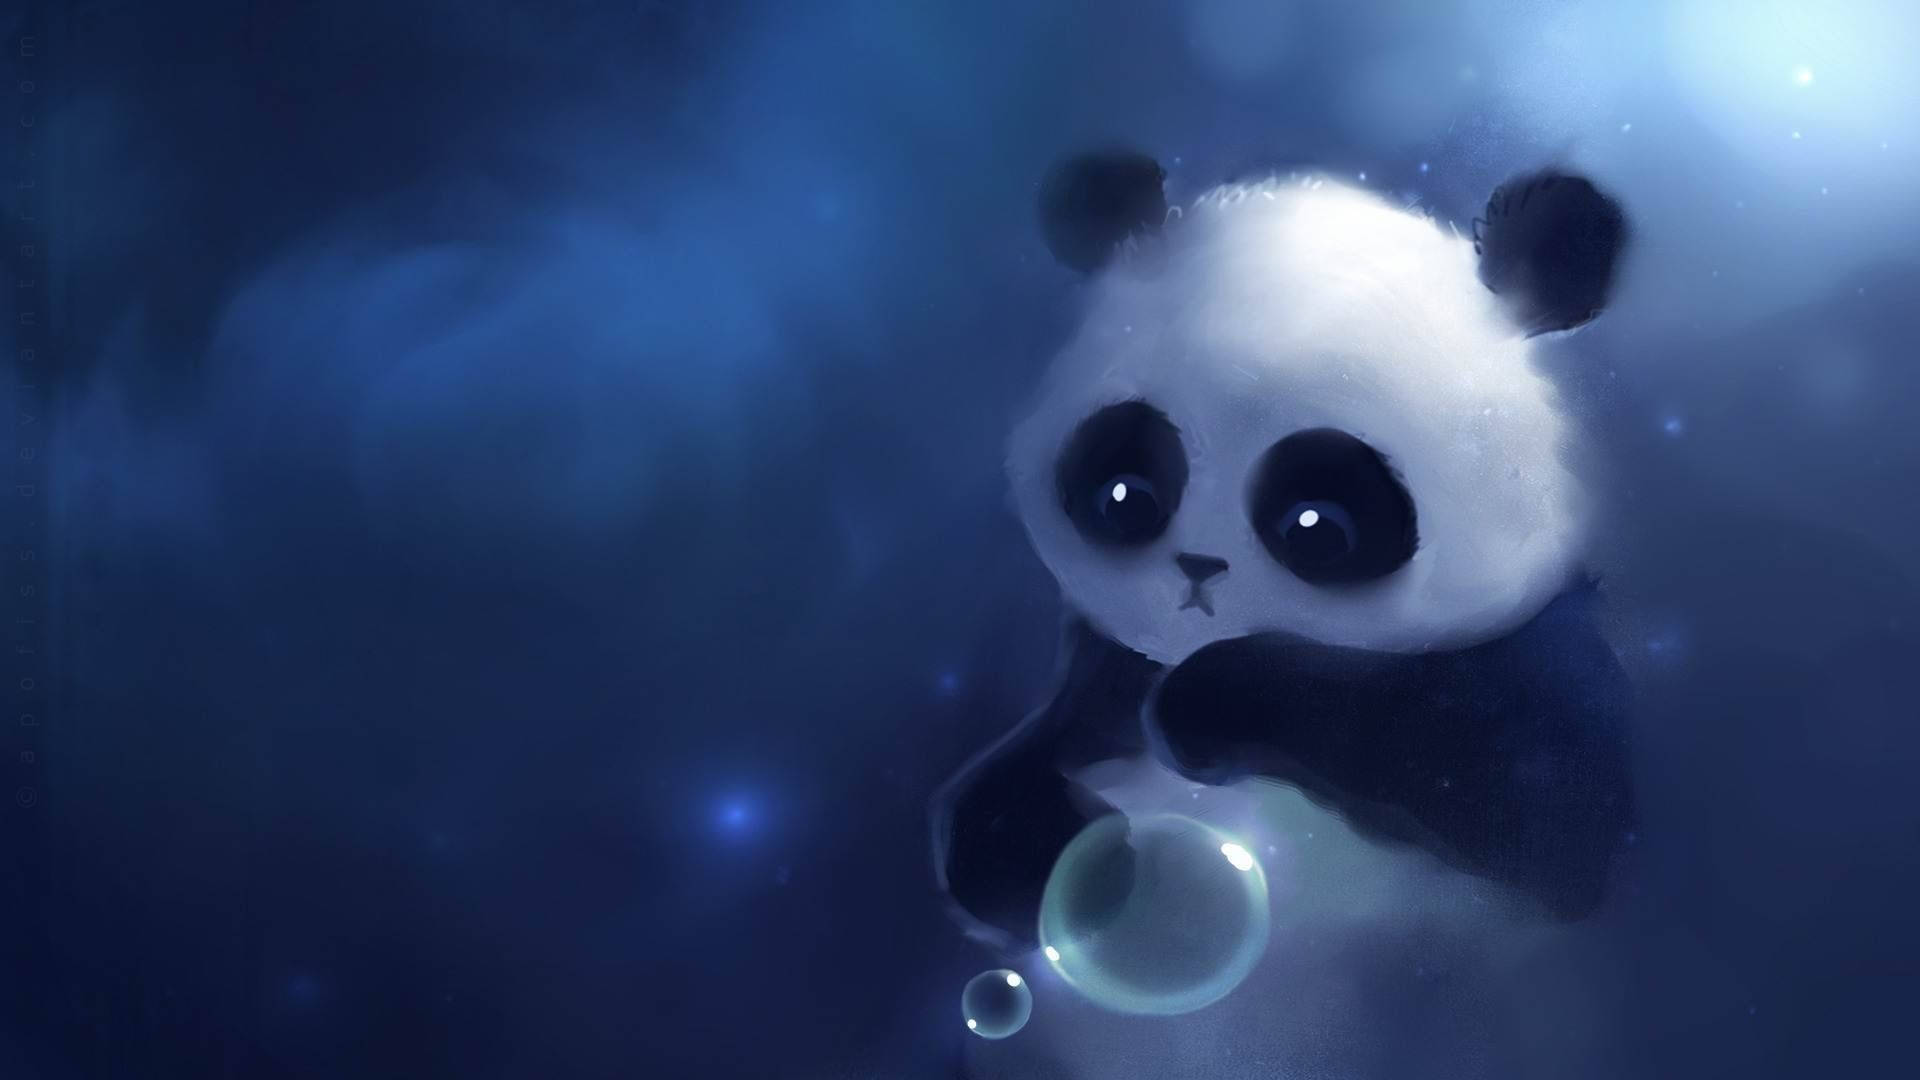 Adorable and Blue Wallpaper